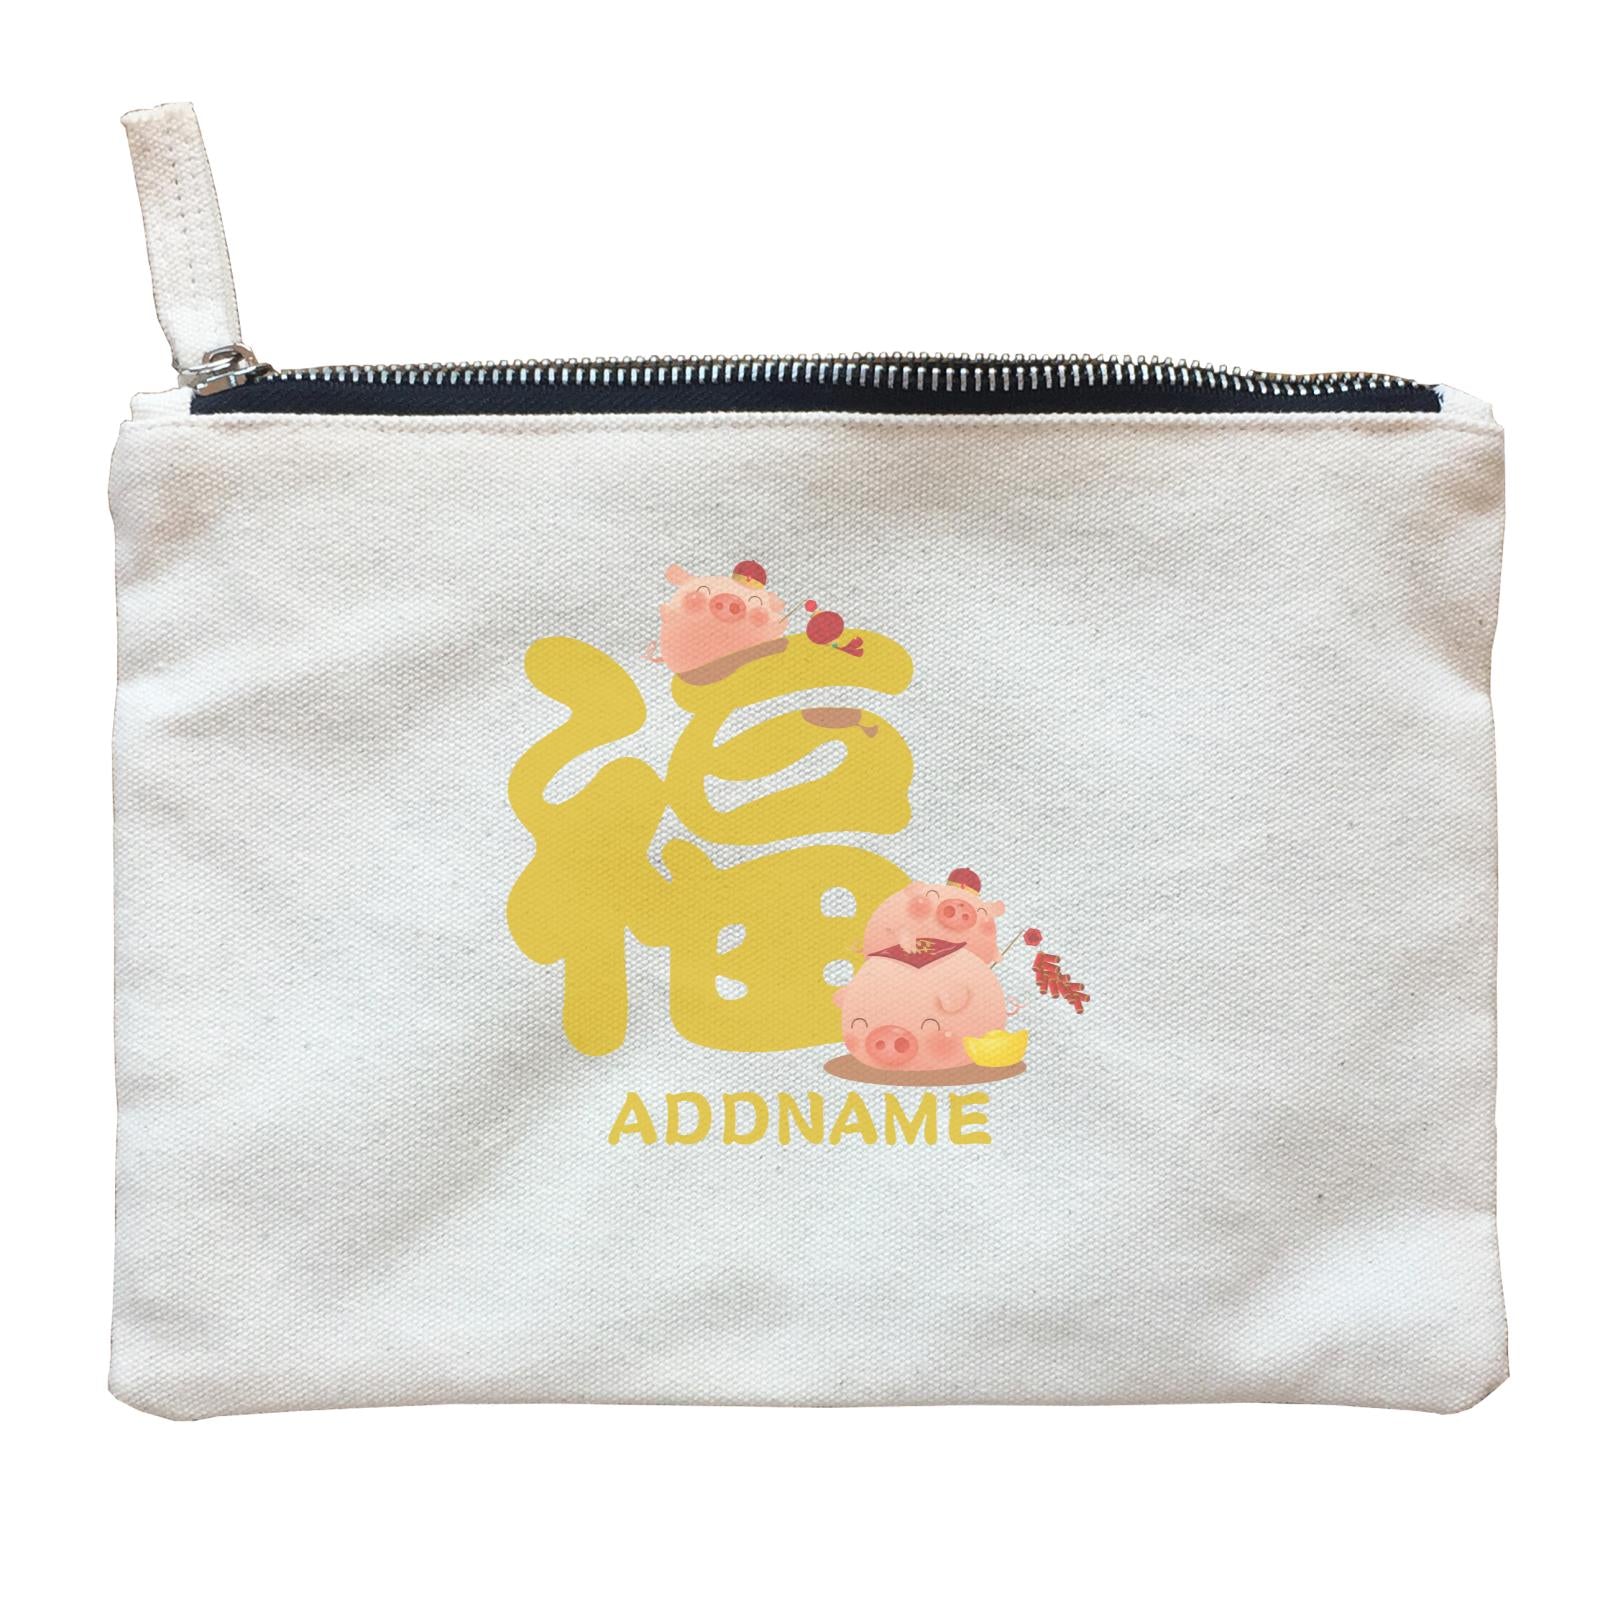 Chinese New Year Pig Group With Happiness Emblem Addname Zipper Pouch